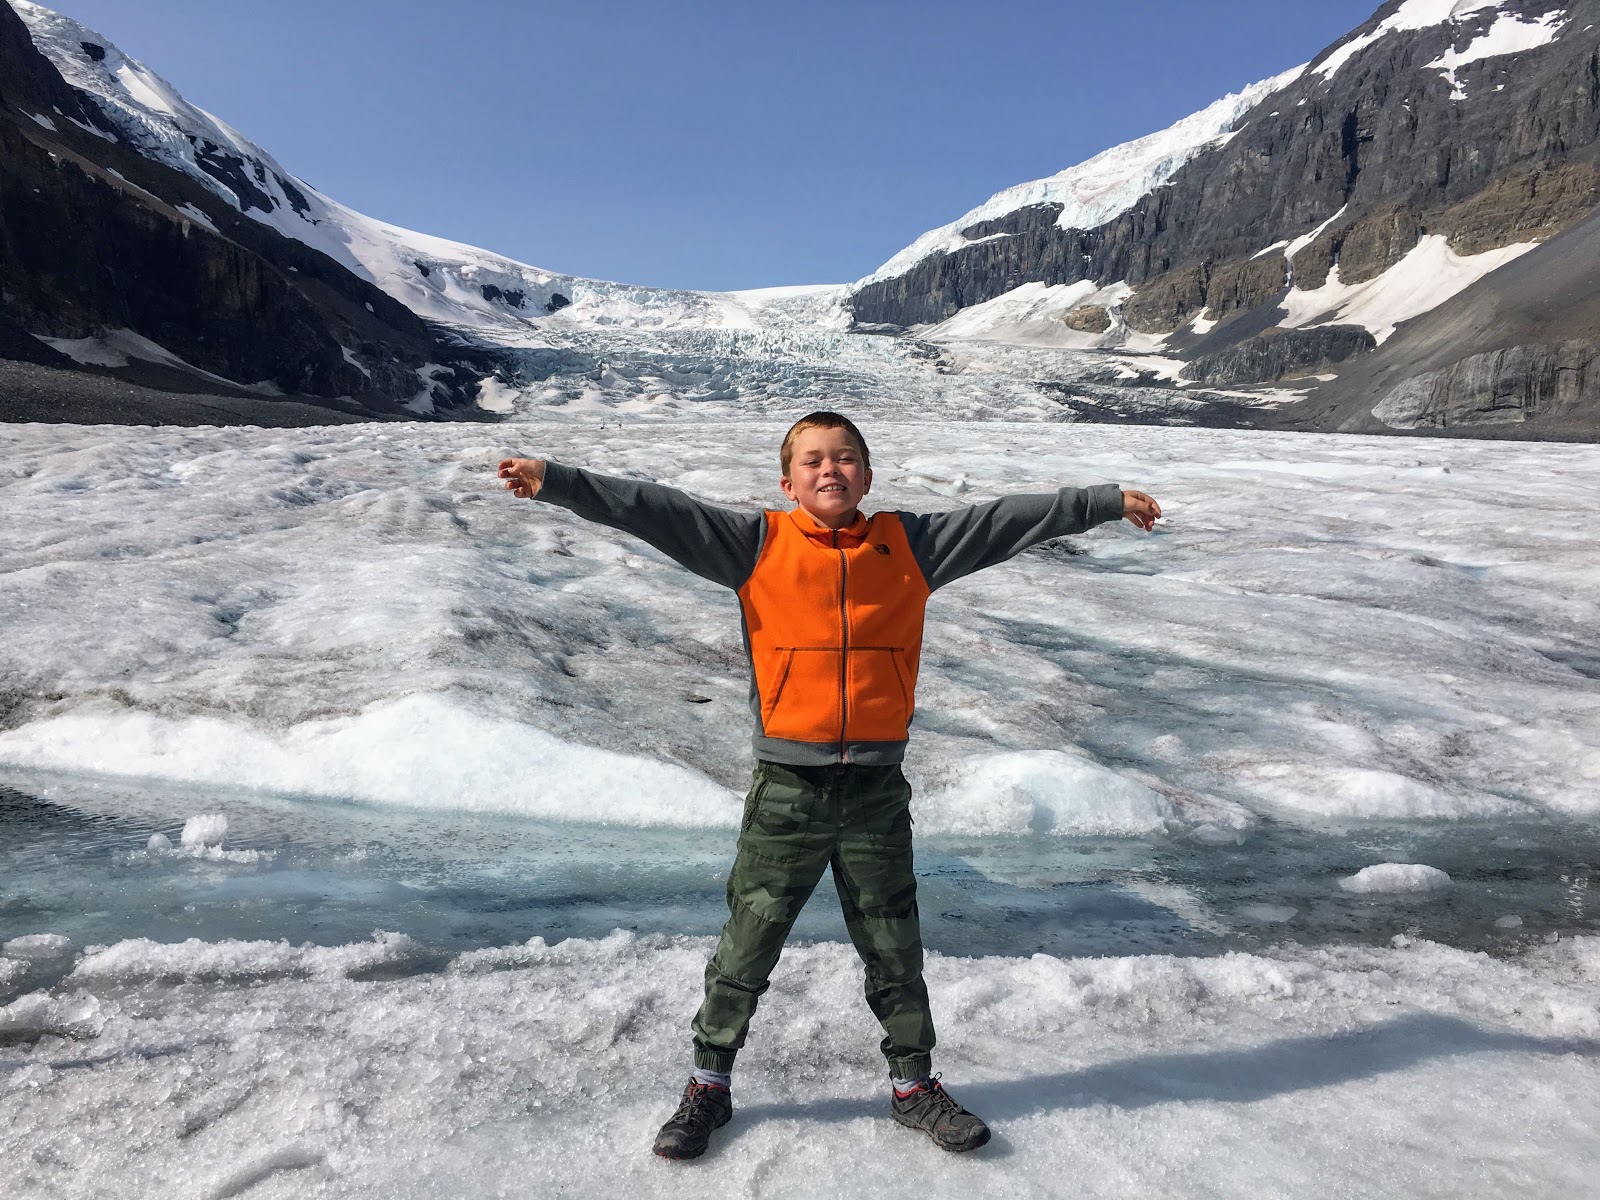 Columbia Icefield Adventure: Athabasca Glacier Tours and Viewing